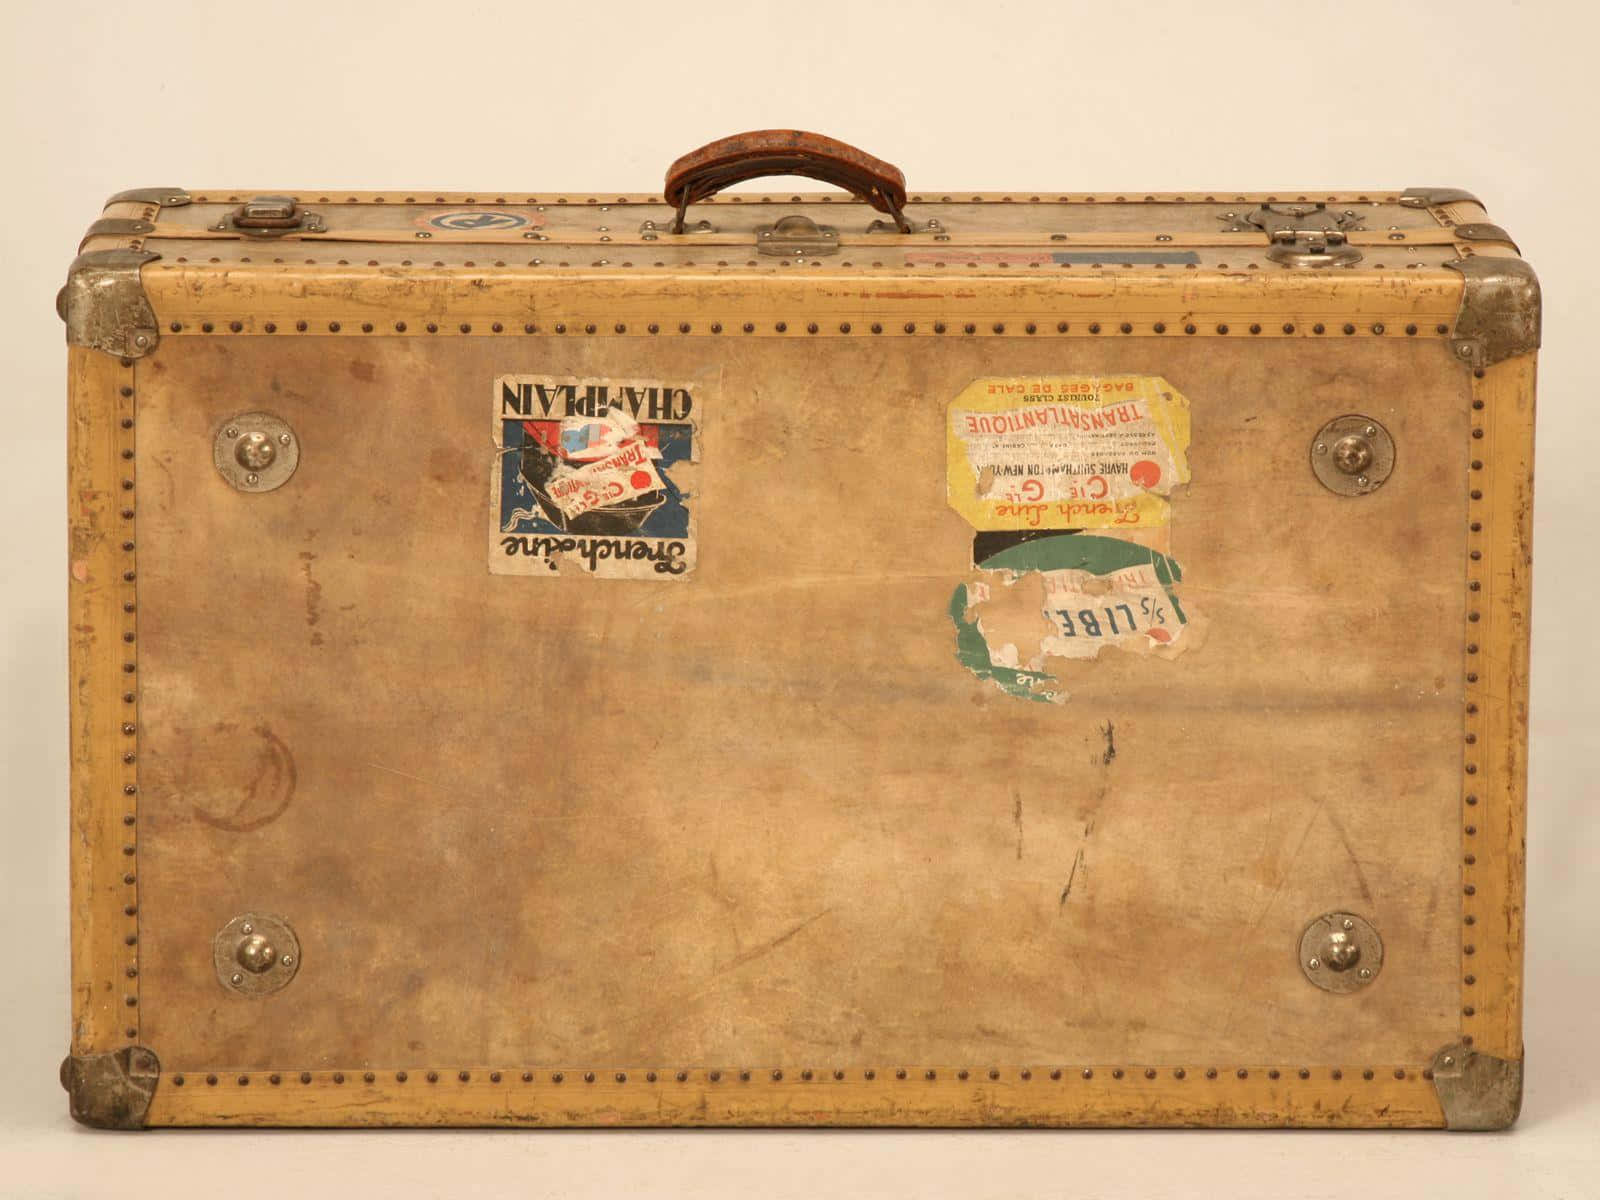 Classic Vintage Luggage Wallpaper